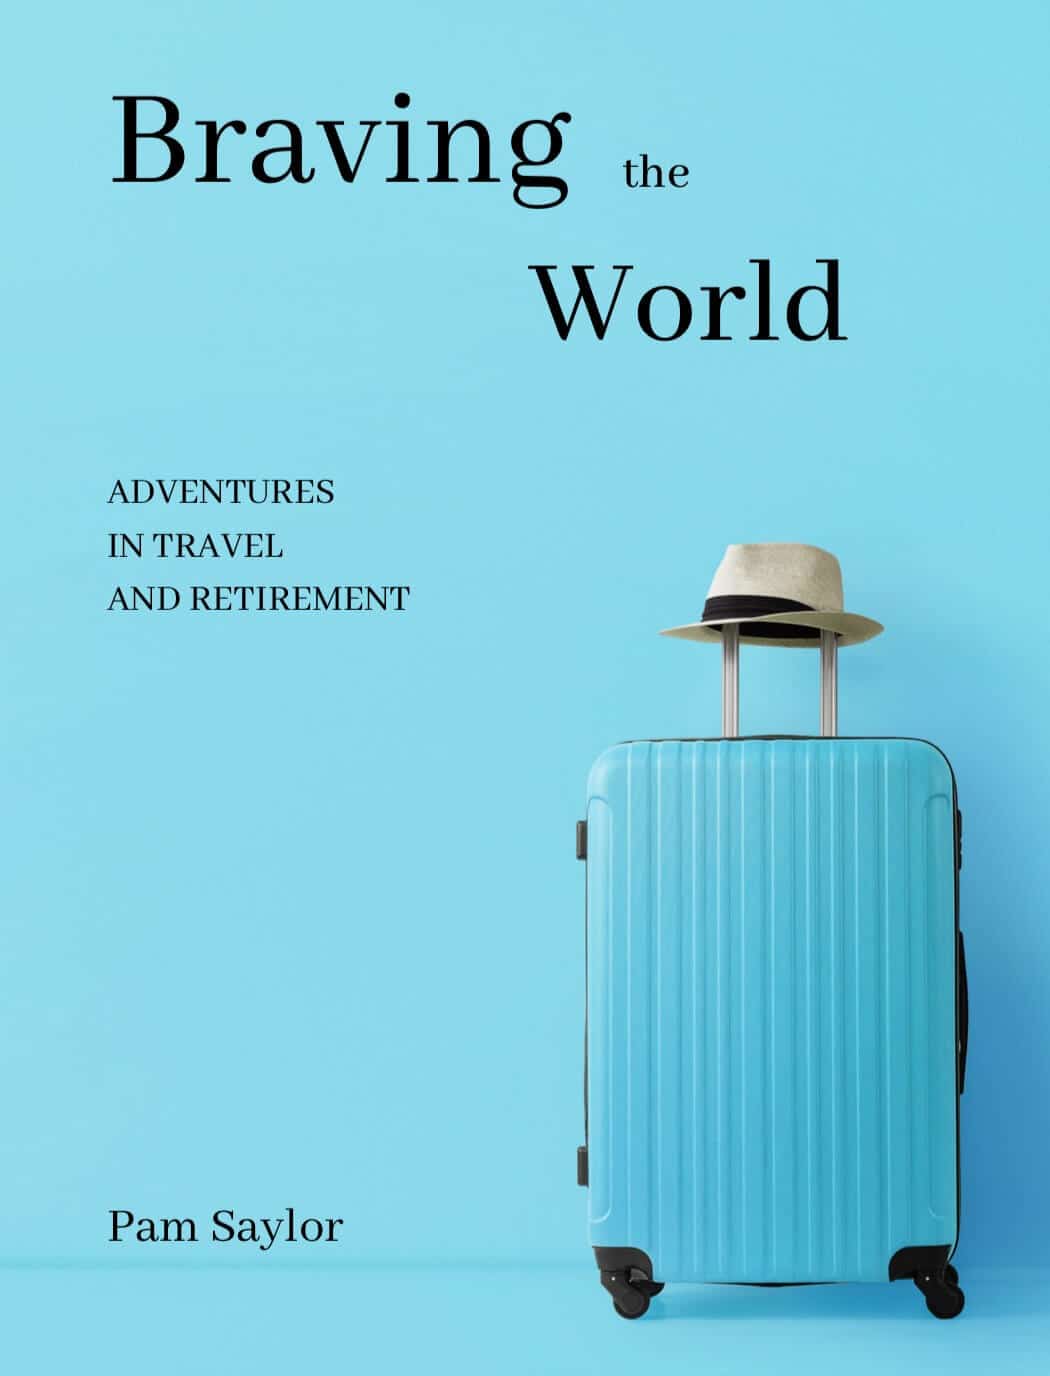 Braving the World book cover